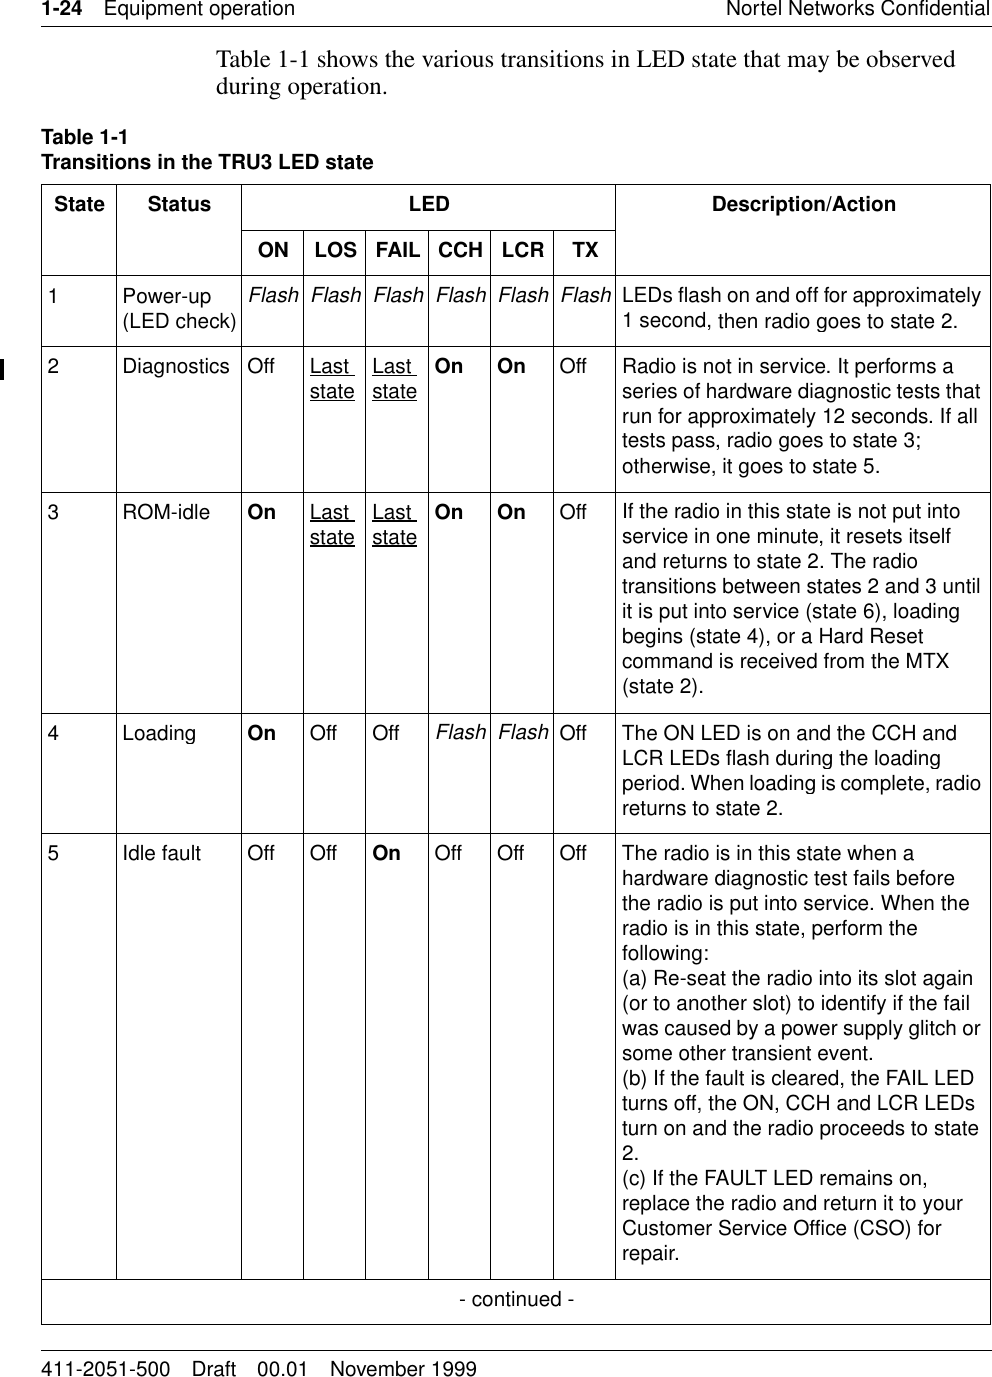 1-24 Equipment operation Nortel Networks Confidential411-2051-500 Draft 00.01 November 1999Table 1-1 shows the various transitions in LED state that may be observed during operation.Table 1-1Transitions in the TRU3 LED stateState Status LED Description/ActionON LOS FAIL CCH LCR TX1 Power-up (LED check)Flash Flash Flash Flash Flash FlashLEDs flash on and off for approximately 1 second, then radio goes to state 2.2Diagnostics Off Last state Last state On On Off Radio is not in service. It performs a series of hardware diagnostic tests that run for approximately 12 seconds. If all tests pass, radio goes to state 3; otherwise, it goes to state 5.3 ROM-idle On Last state Last state On On Off If the radio in this state is not put into service in one minute, it resets itself and returns to state 2. The radio transitions between states 2 and 3 until it is put into service (state 6), loading begins (state 4), or a Hard Reset command is received from the MTX (state 2).4 LoadingOn Off OffFlash FlashOff The ON LED is on and the CCH and LCR LEDs flash during the loading period. When loading is complete, radio returns to state 2.5 Idle fault Off Off On Off Off Off The radio is in this state when a hardware diagnostic test fails before the radio is put into service. When the radio is in this state, perform the following:(a) Re-seat the radio into its slot again (or to another slot) to identify if the fail was caused by a power supply glitch or some other transient event. (b) If the fault is cleared, the FAIL LED turns off, the ON, CCH and LCR LEDs turn on and the radio proceeds to state 2.(c) If the FAULT LED remains on, replace the radio and return it to your Customer Service Office (CSO) for repair.- continued -